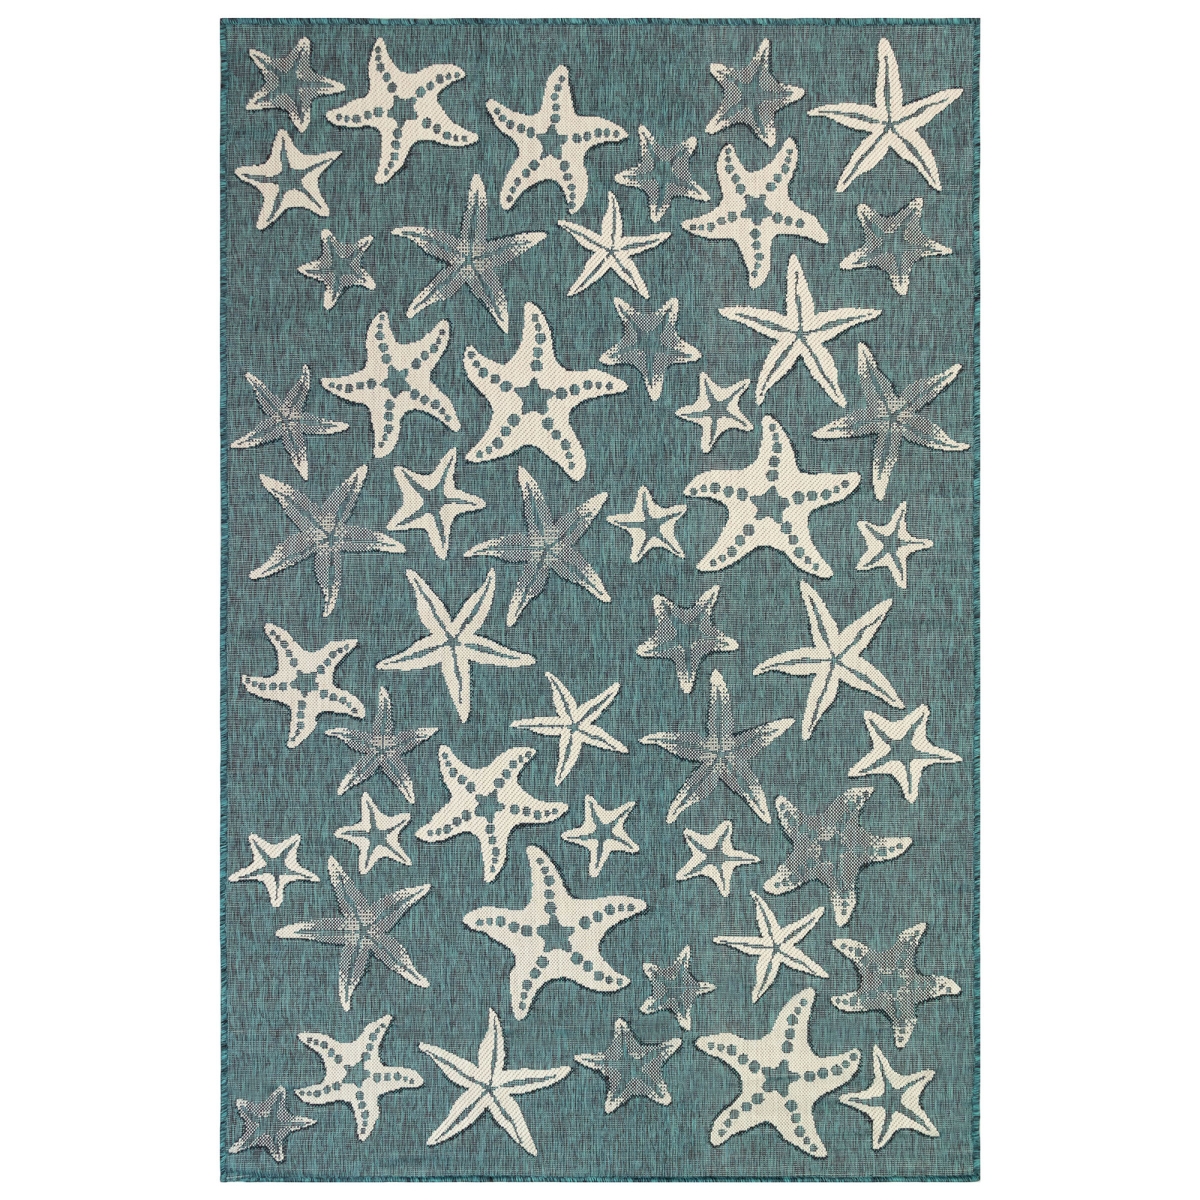 Cre45841594 Liora Manne Carmel Starfish Indoor & Outdoor Rug, Teal - 39 X 59 In.